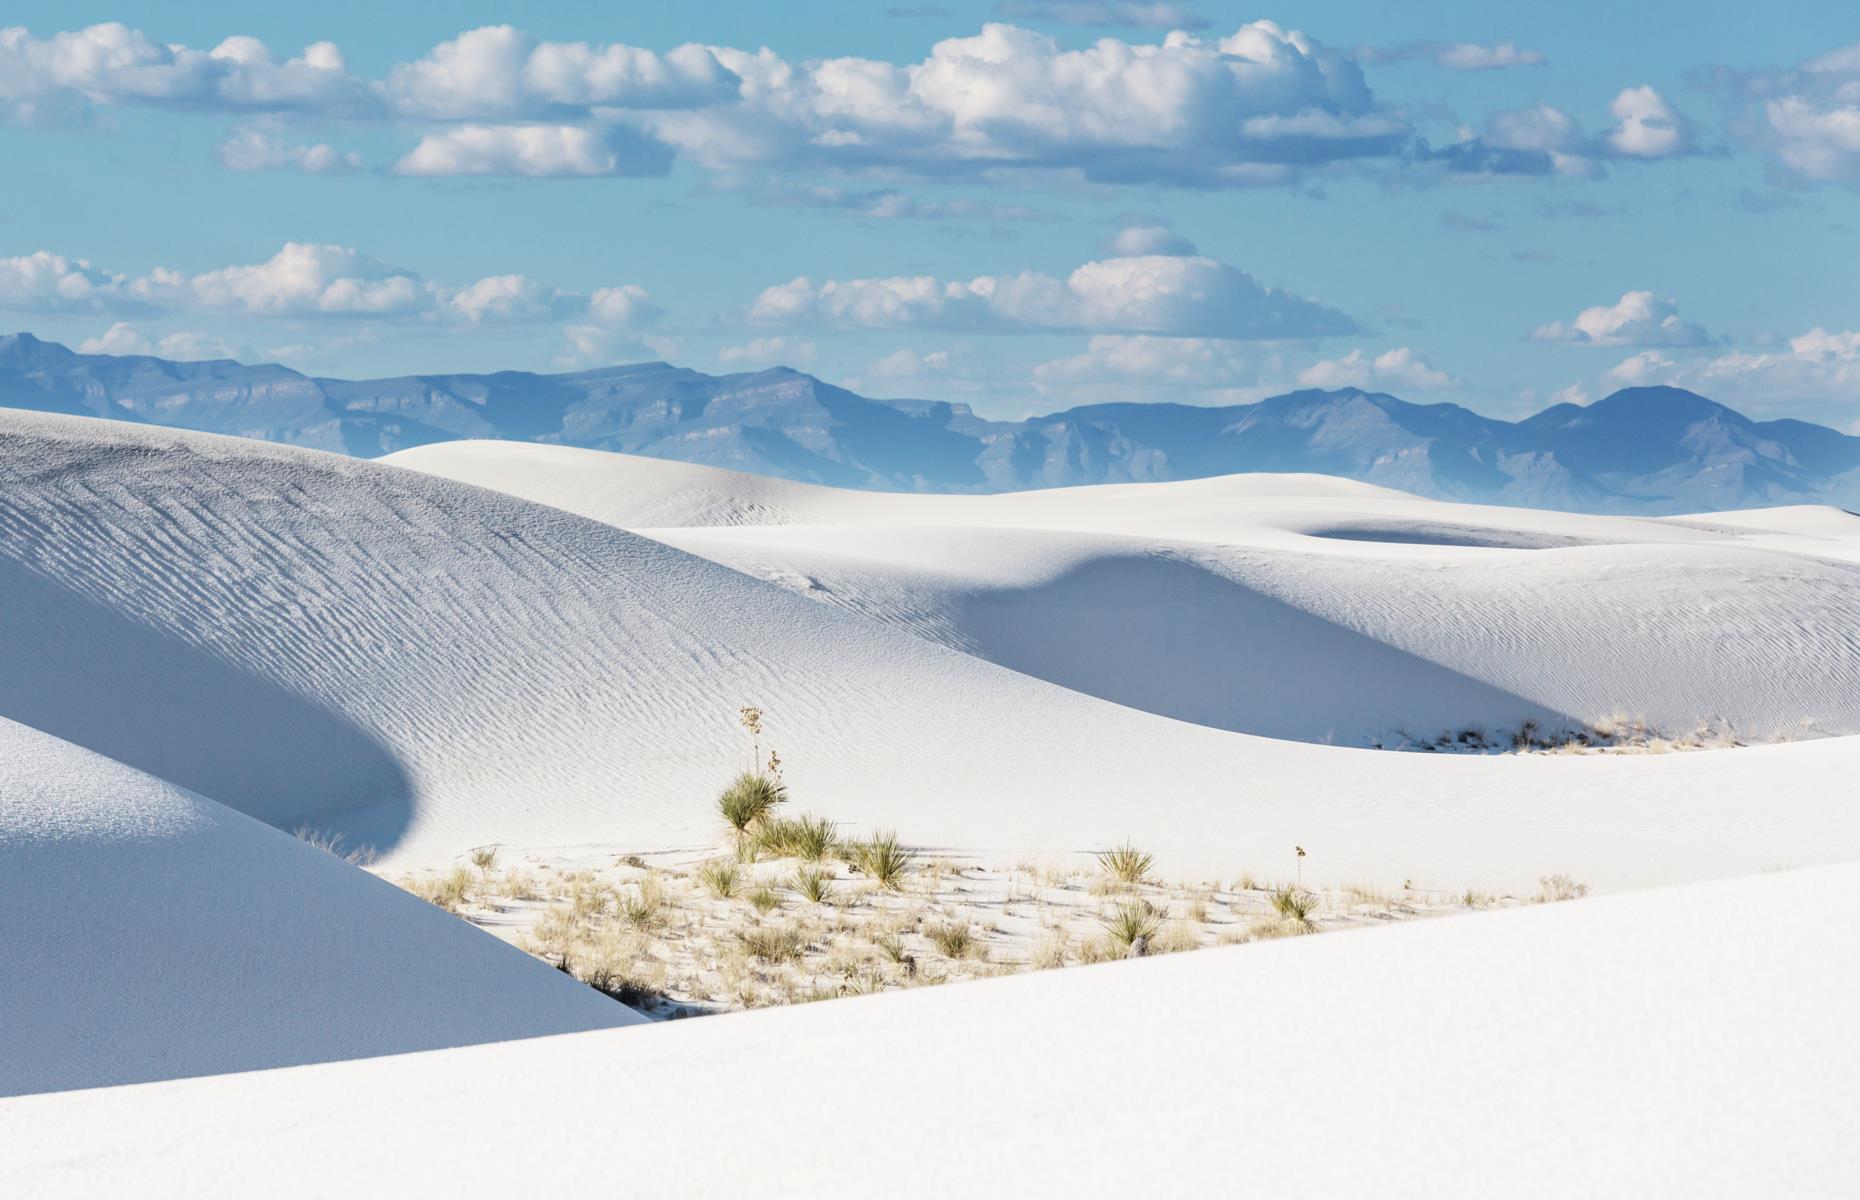 <p>Drivers traveling along the US Route 70 could be forgiven for thinking they’ve landed on another planet or somehow taken a wrong turn and ended up at an enormous, blazingly white beach. The alabaster dunes of <a href="https://www.nps.gov/whsa/index.htm"><span>White Sands National Park</span></a> cover 275 square miles (712sq km), making this the world’s largest gypsum dune field. The white waves can be seen from the road, brightening the landscape between the San Andres and Sacramento mountain ranges.</p>  <p><a href="https://www.loveexploring.com/galleries/90563/americas-most-stunning-natural-wonders"><strong>Discover more of America's stunning natural wonders</strong></a></p>